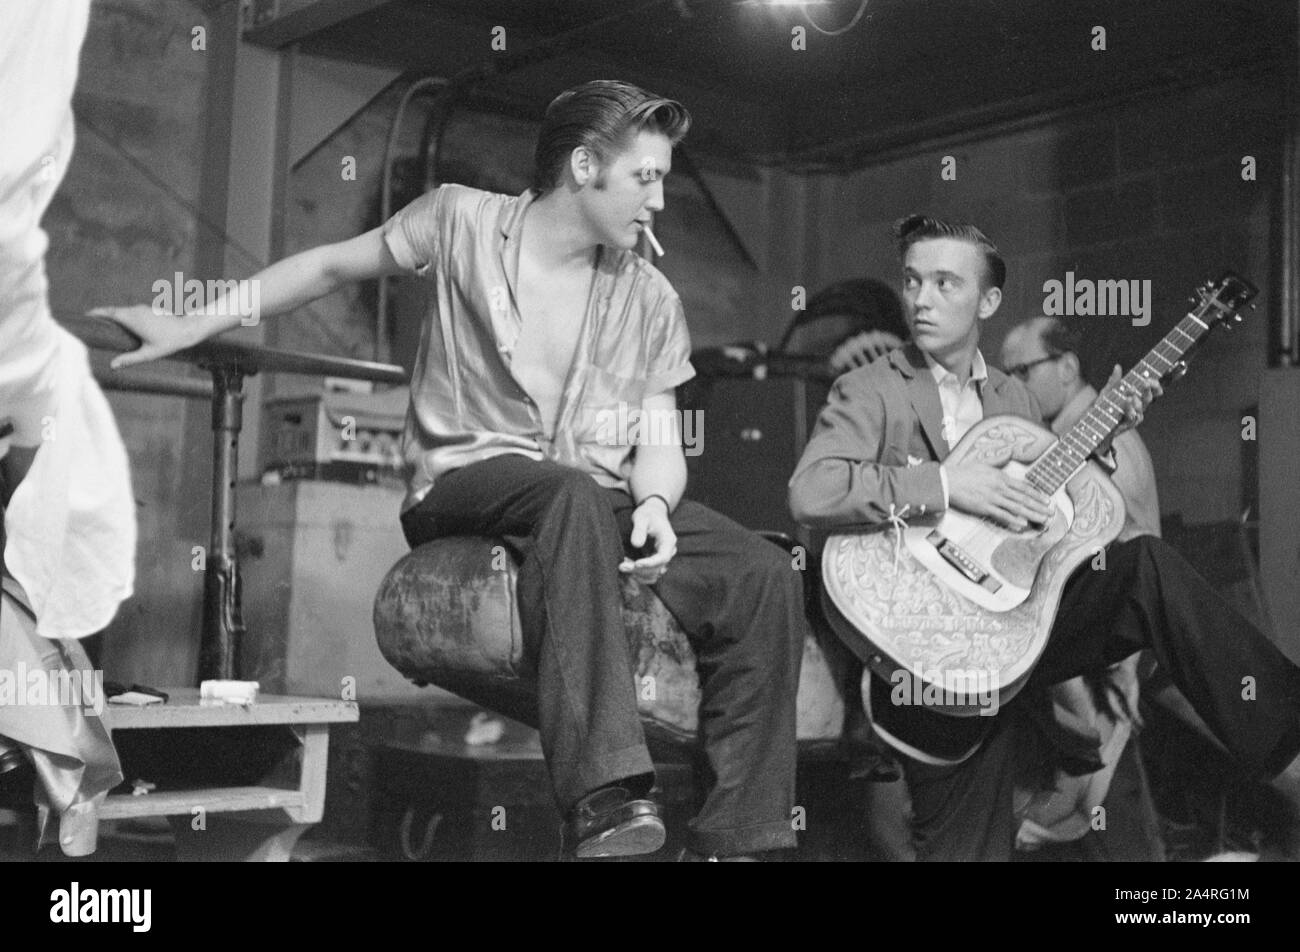 Elvis Presley, Scotty Moore, and Gene Smith backstage at the University of Dayton Fieldhouse, May 27, 1956. Photographer Marvin Israel is partially visible in the background. Stock Photo